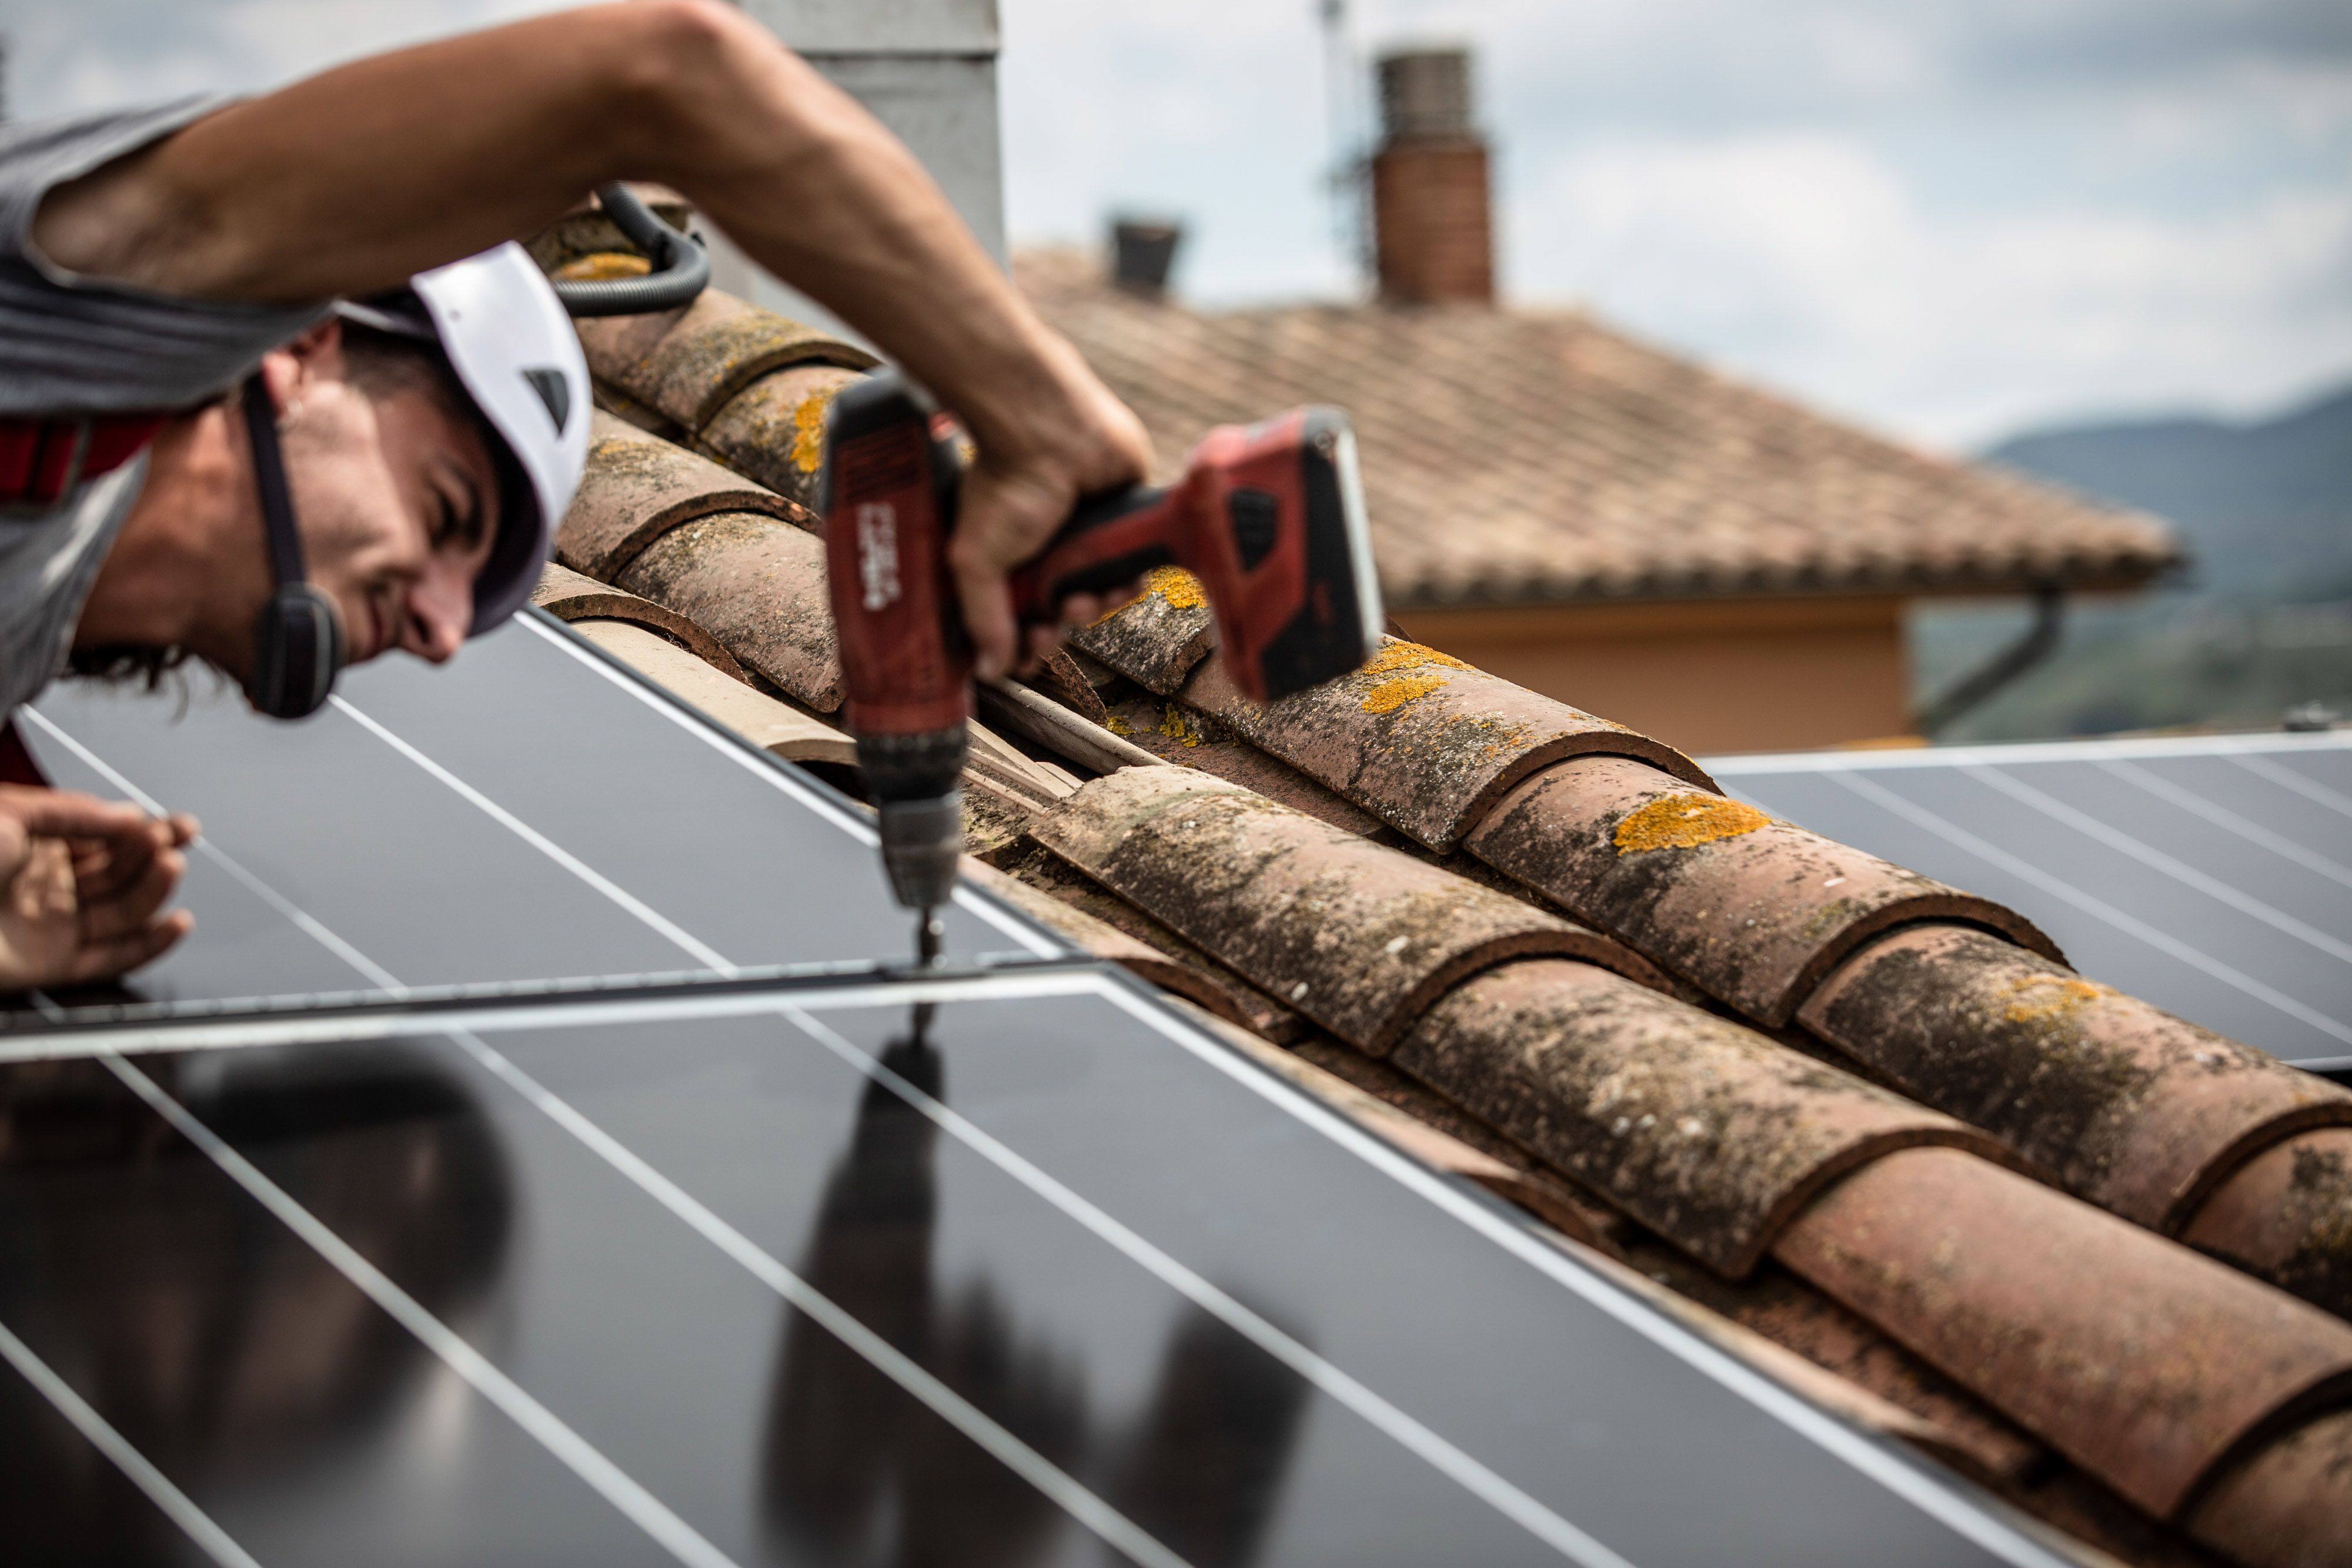 An engineer installs a solar panel on the roof of a home in Barcelona, Spain, on September 7. Spain and other Mediterranean countries generated record amounts of power from wind and solar farms, underscoring the potential for renewables to replace expensive fossil fuels. Photo: Bloomberg